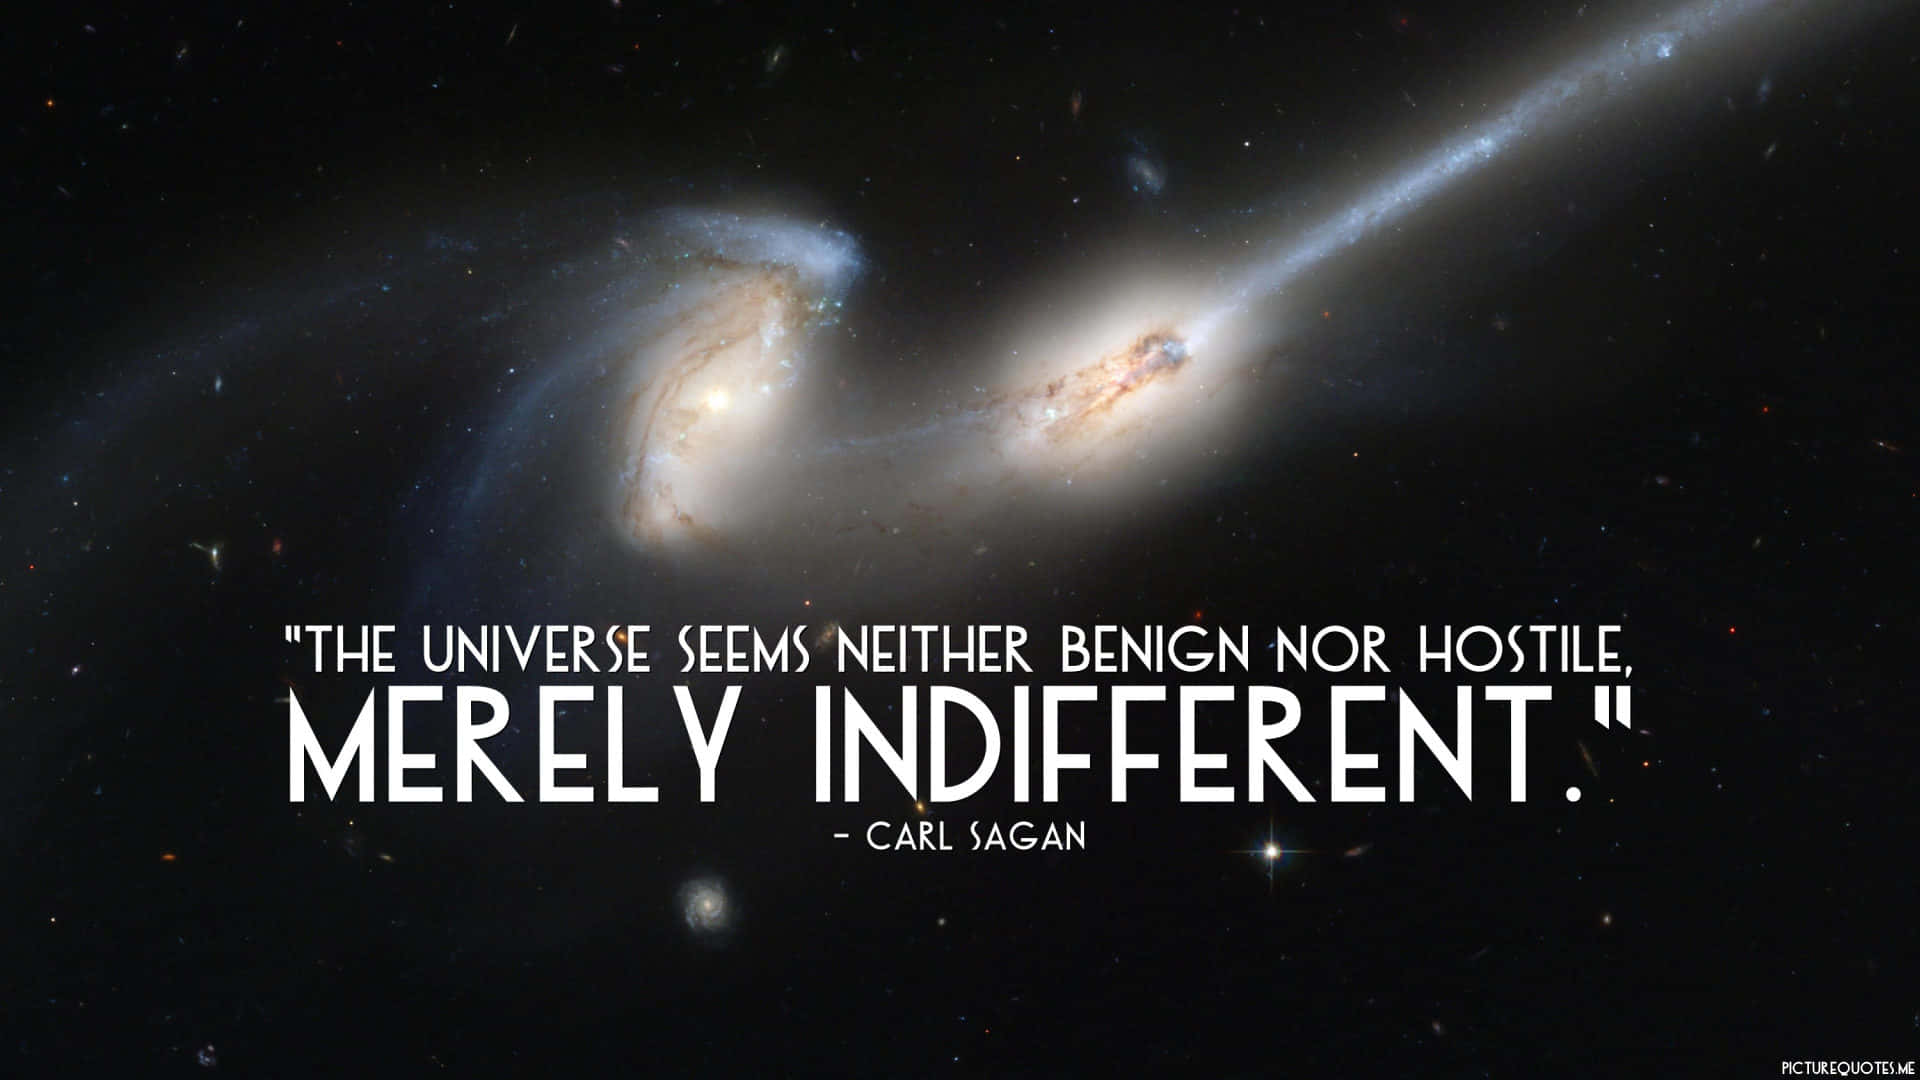 Carl Sagan's Quote On An Indifferent Universe Wallpaper